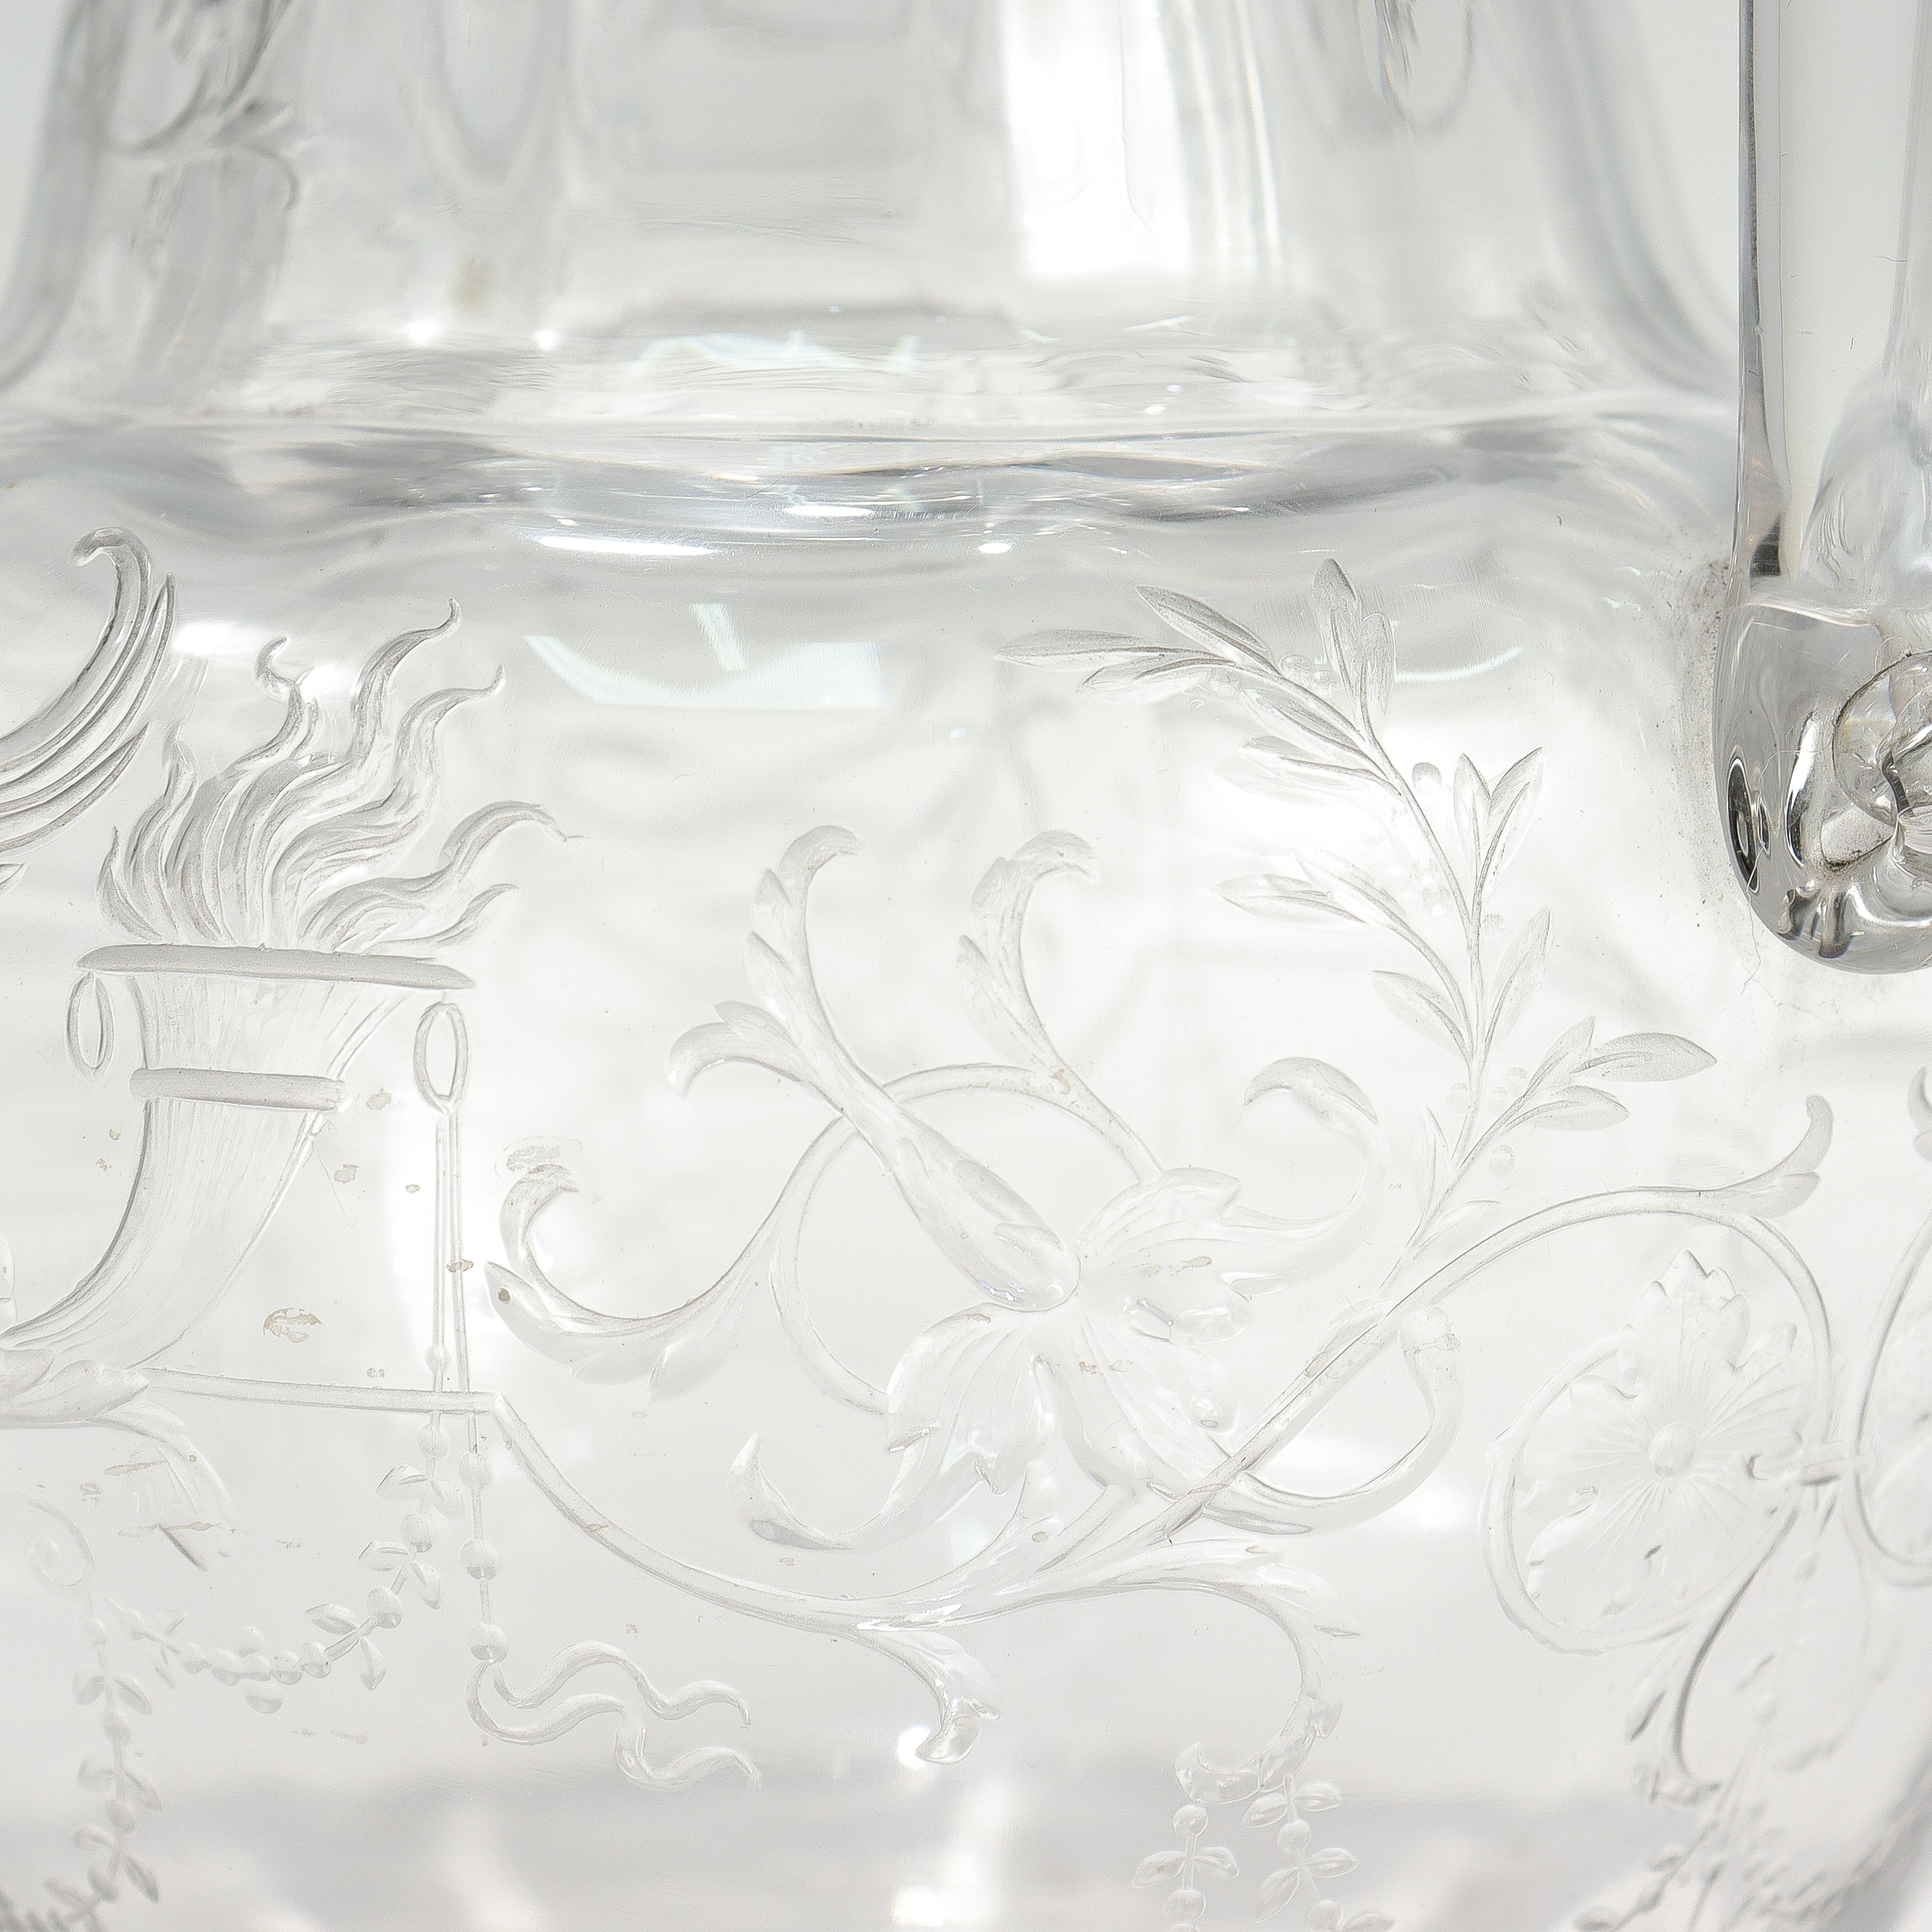 Antique Cut Glass Pitcher with Birds & Phoenix Attributed to Stevens & Williams For Sale 7